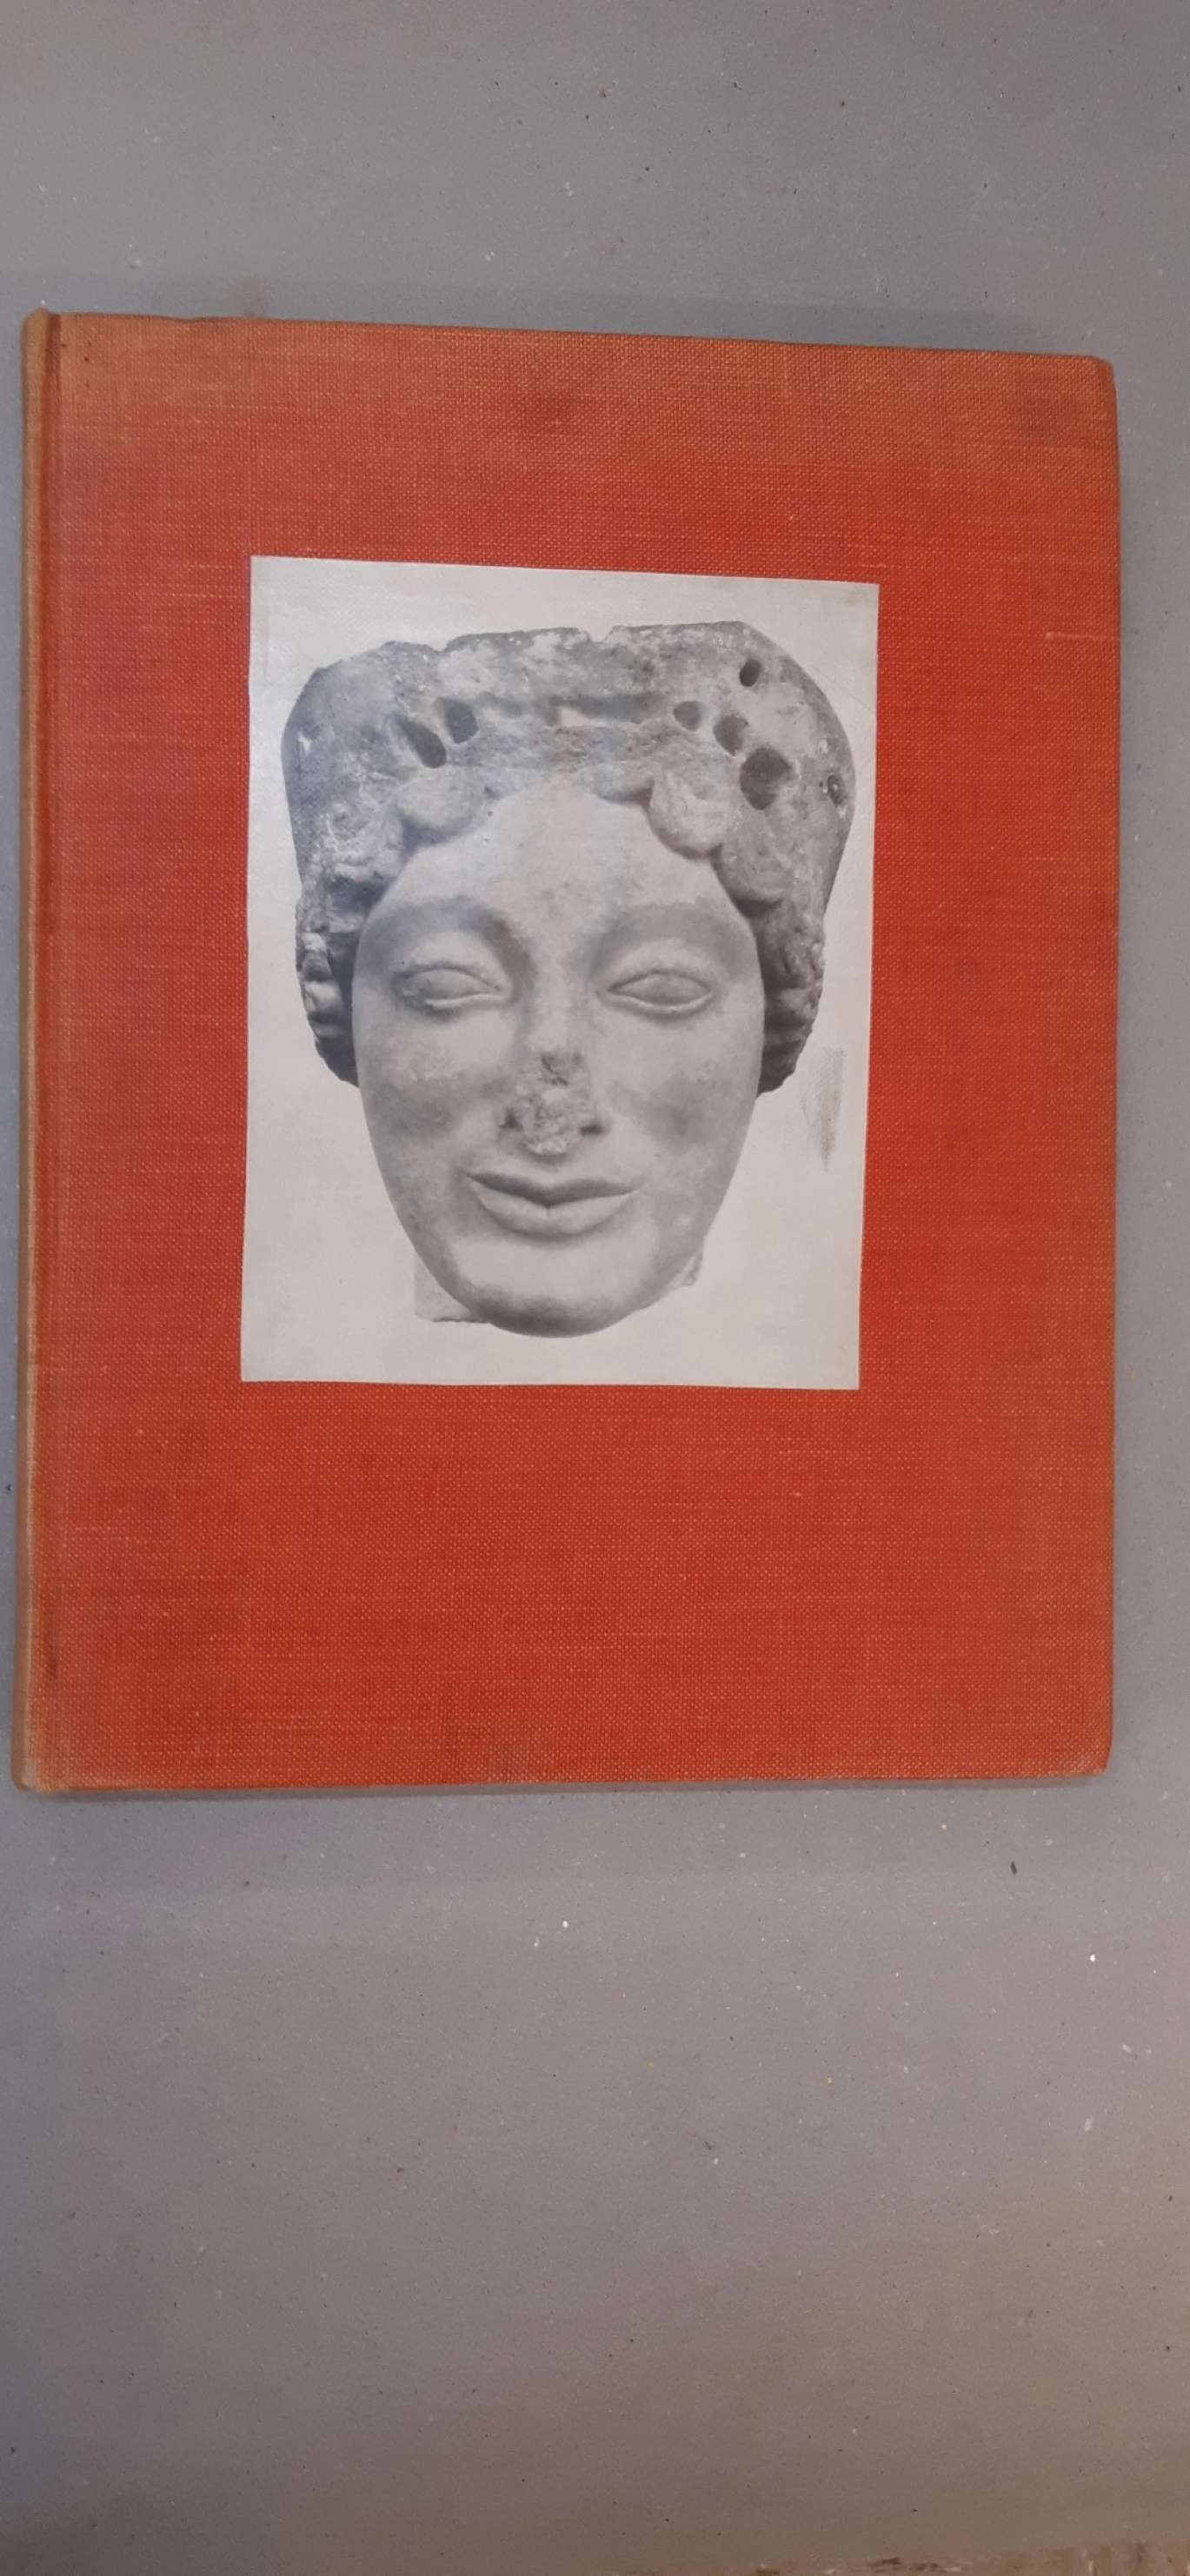 Payne, H., G. Mackworth-Young: Archaic Marble Sculpture from the Acropolis